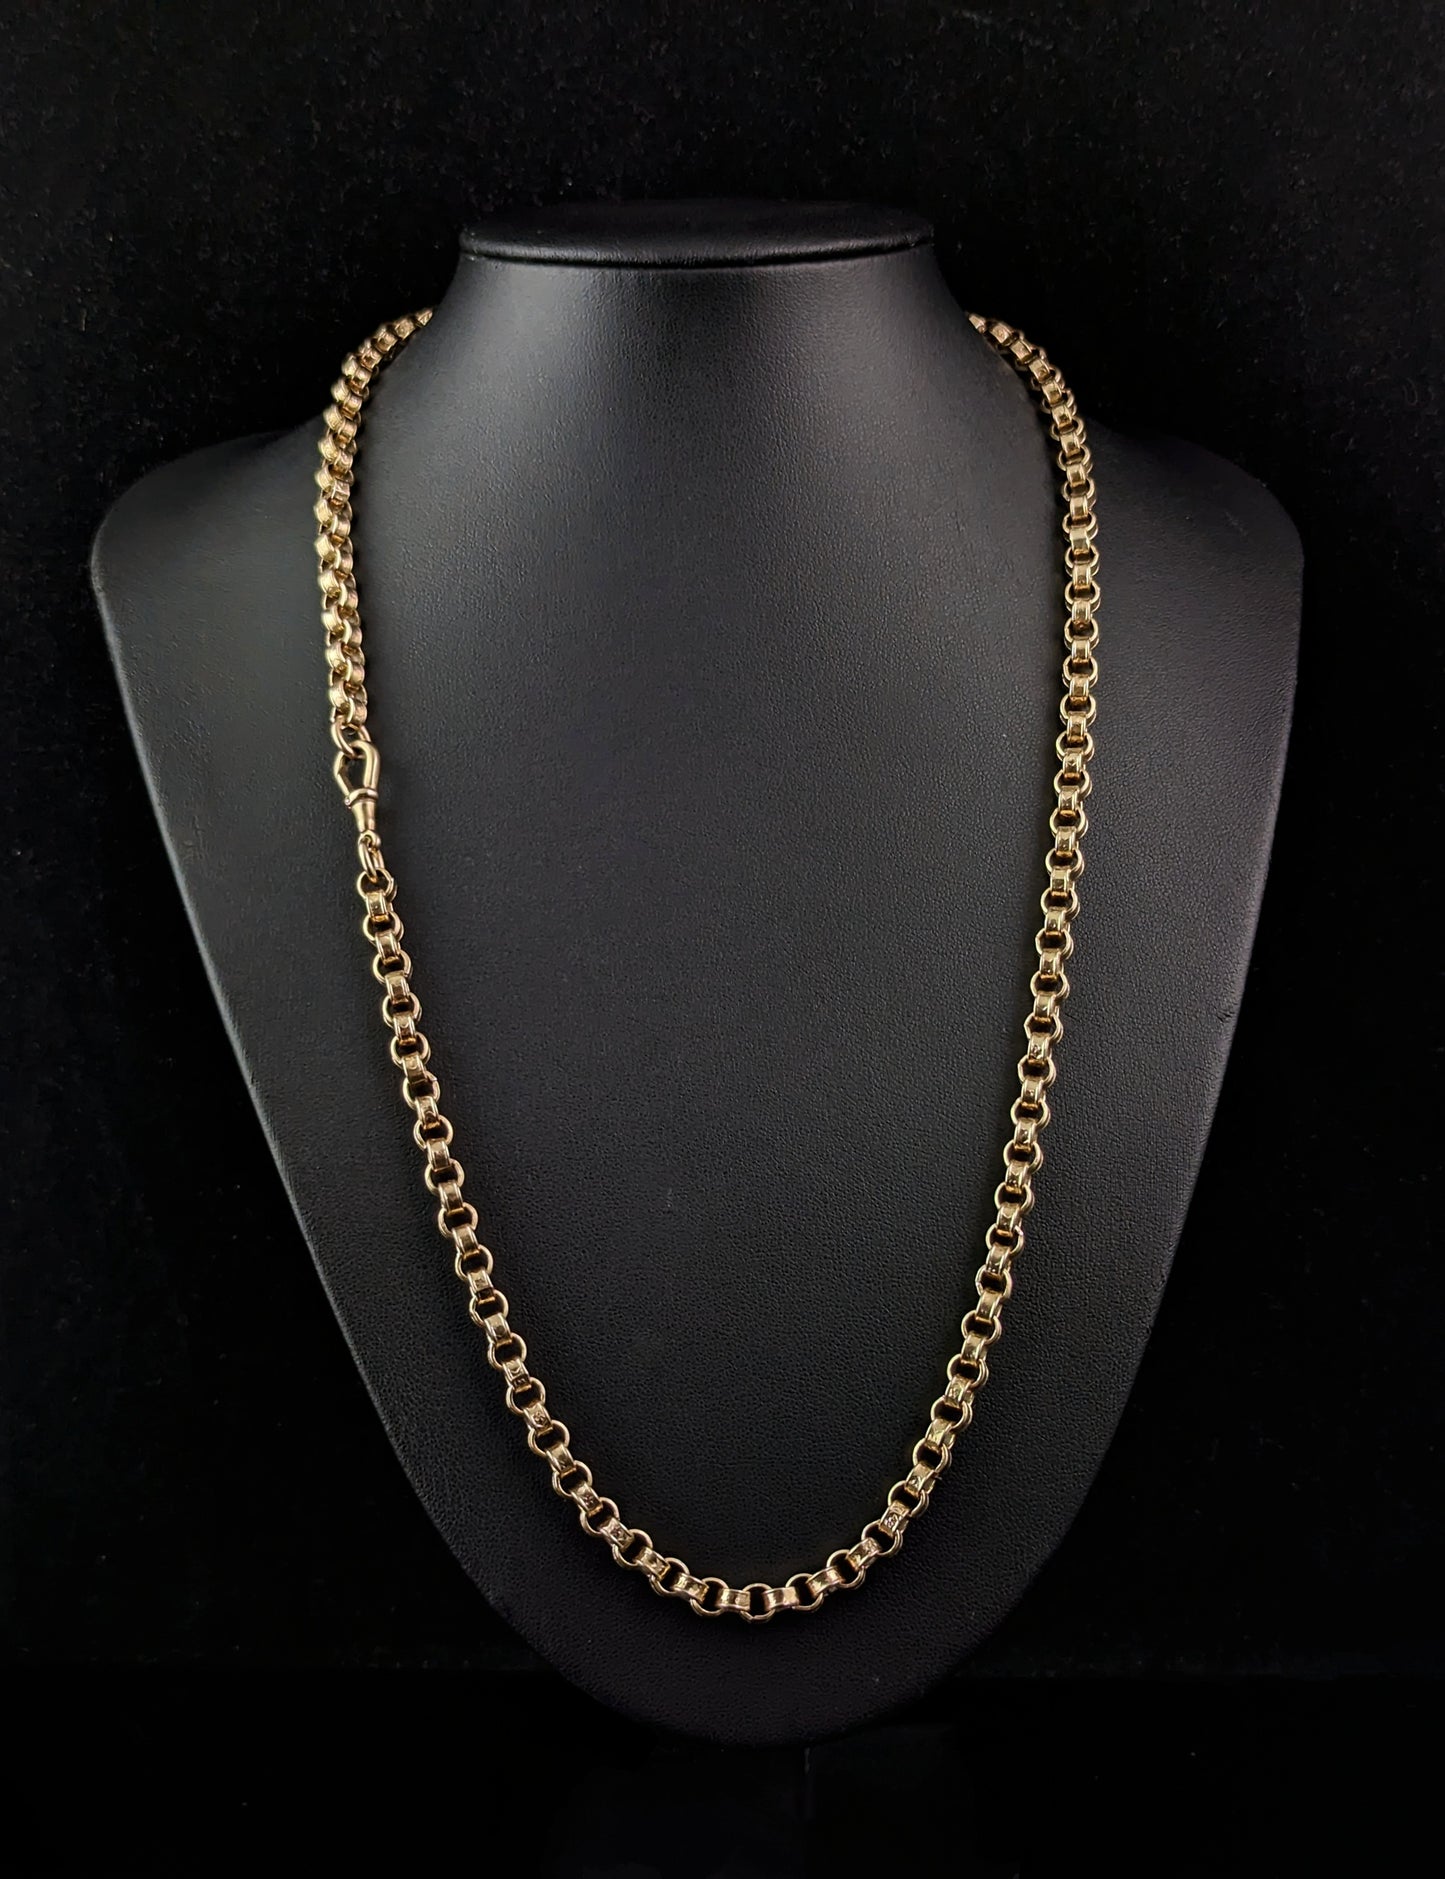 Antique 9ct gold Fancy rolo link chain necklace, Victorian